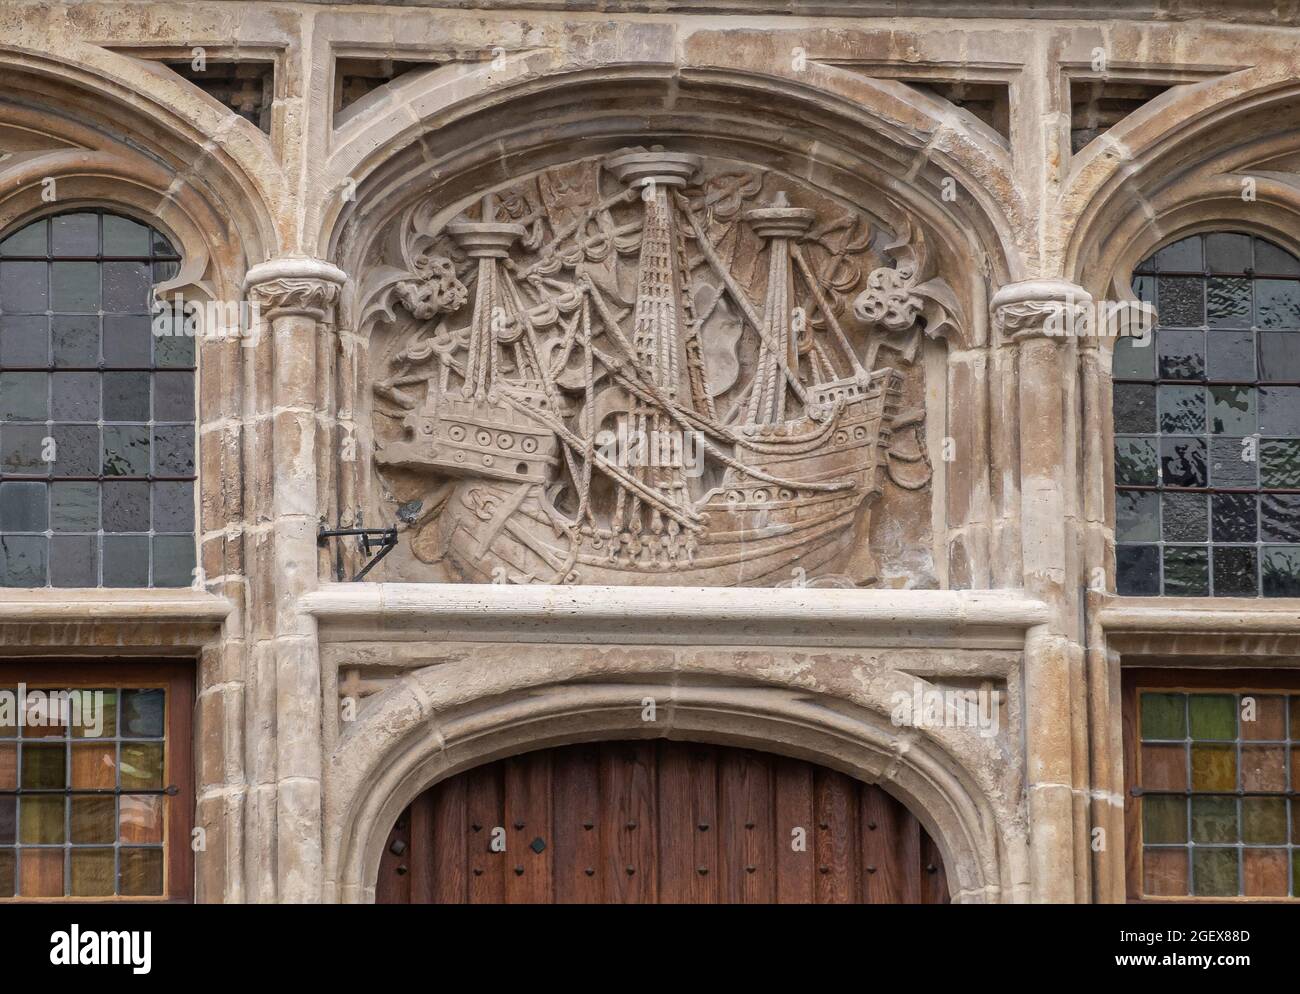 Gent, Flanders, Belgium - July 30, 2021: Closeup of fresco showing large medieval sailing ship above door of House of the free Shippers (Huis van de V Stock Photo